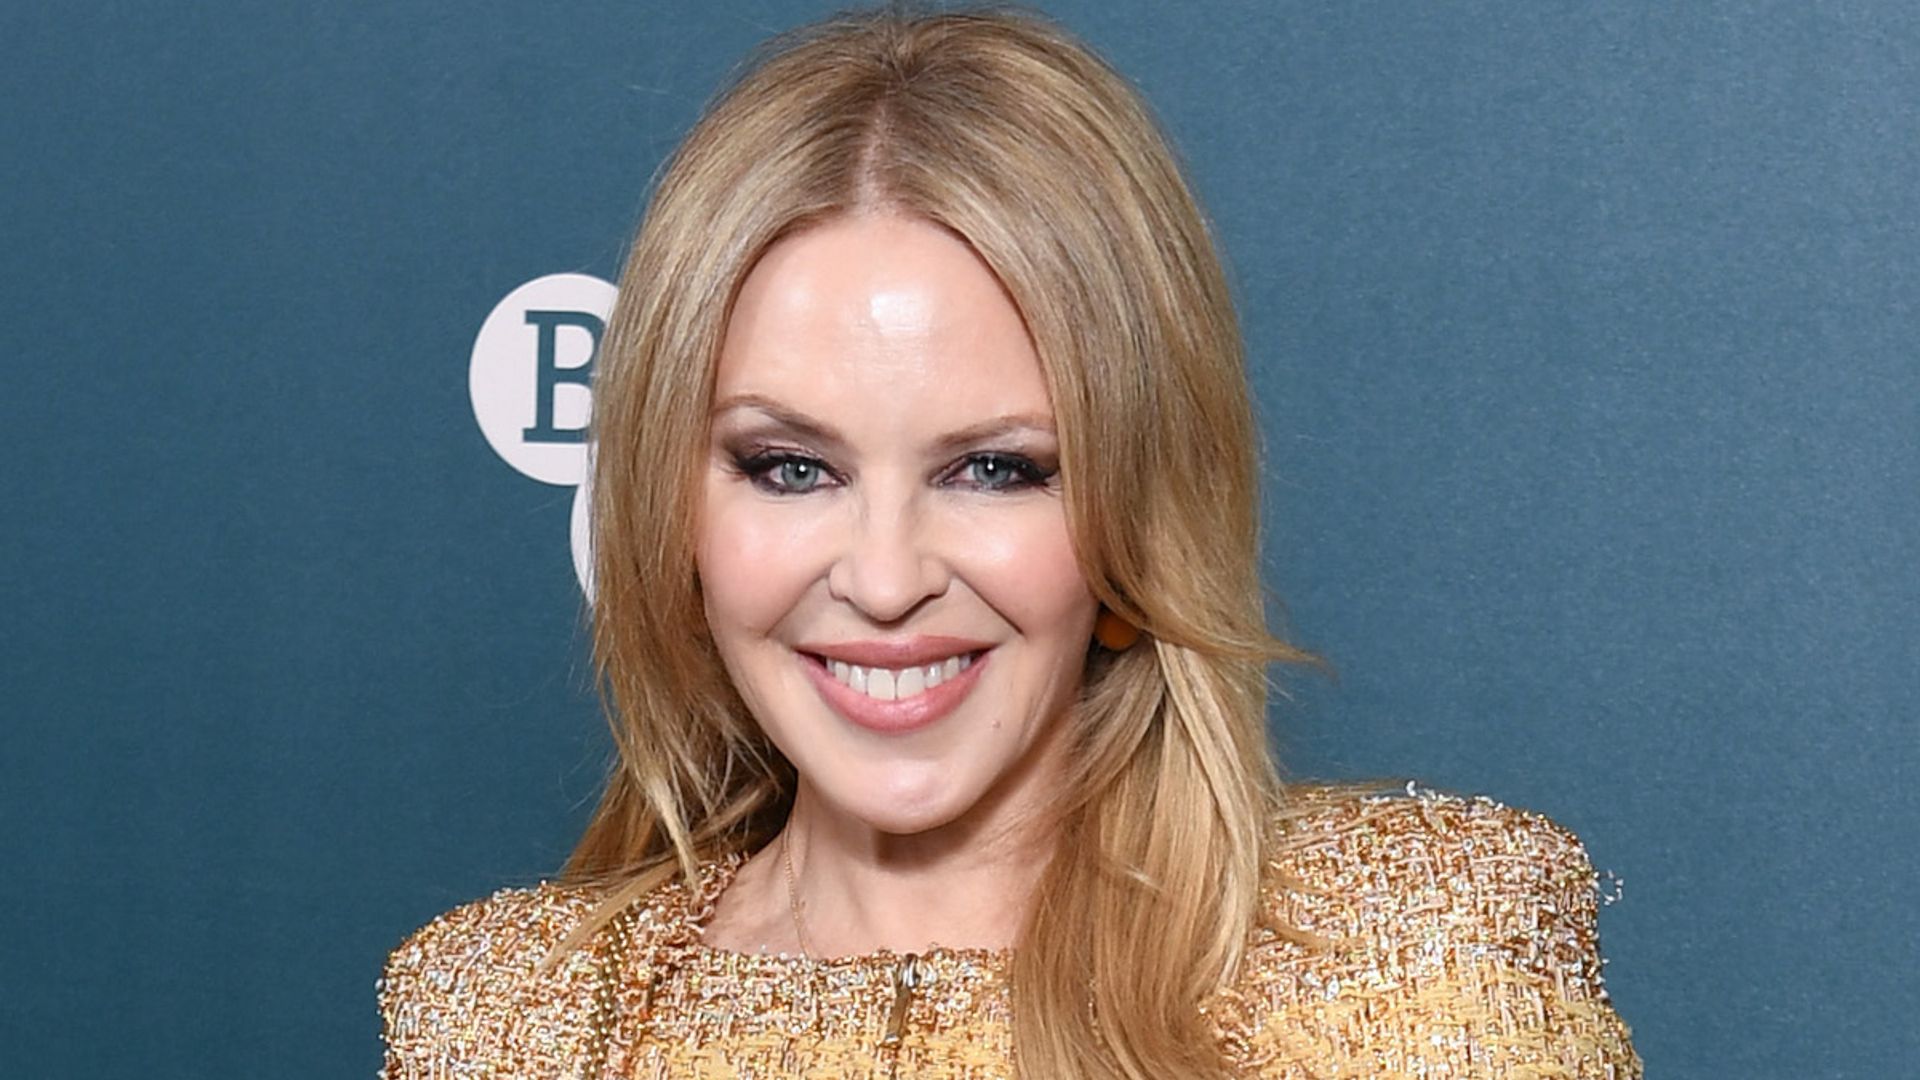 Kylie Minogue's incredible thigh-split dress has us seriously swooning